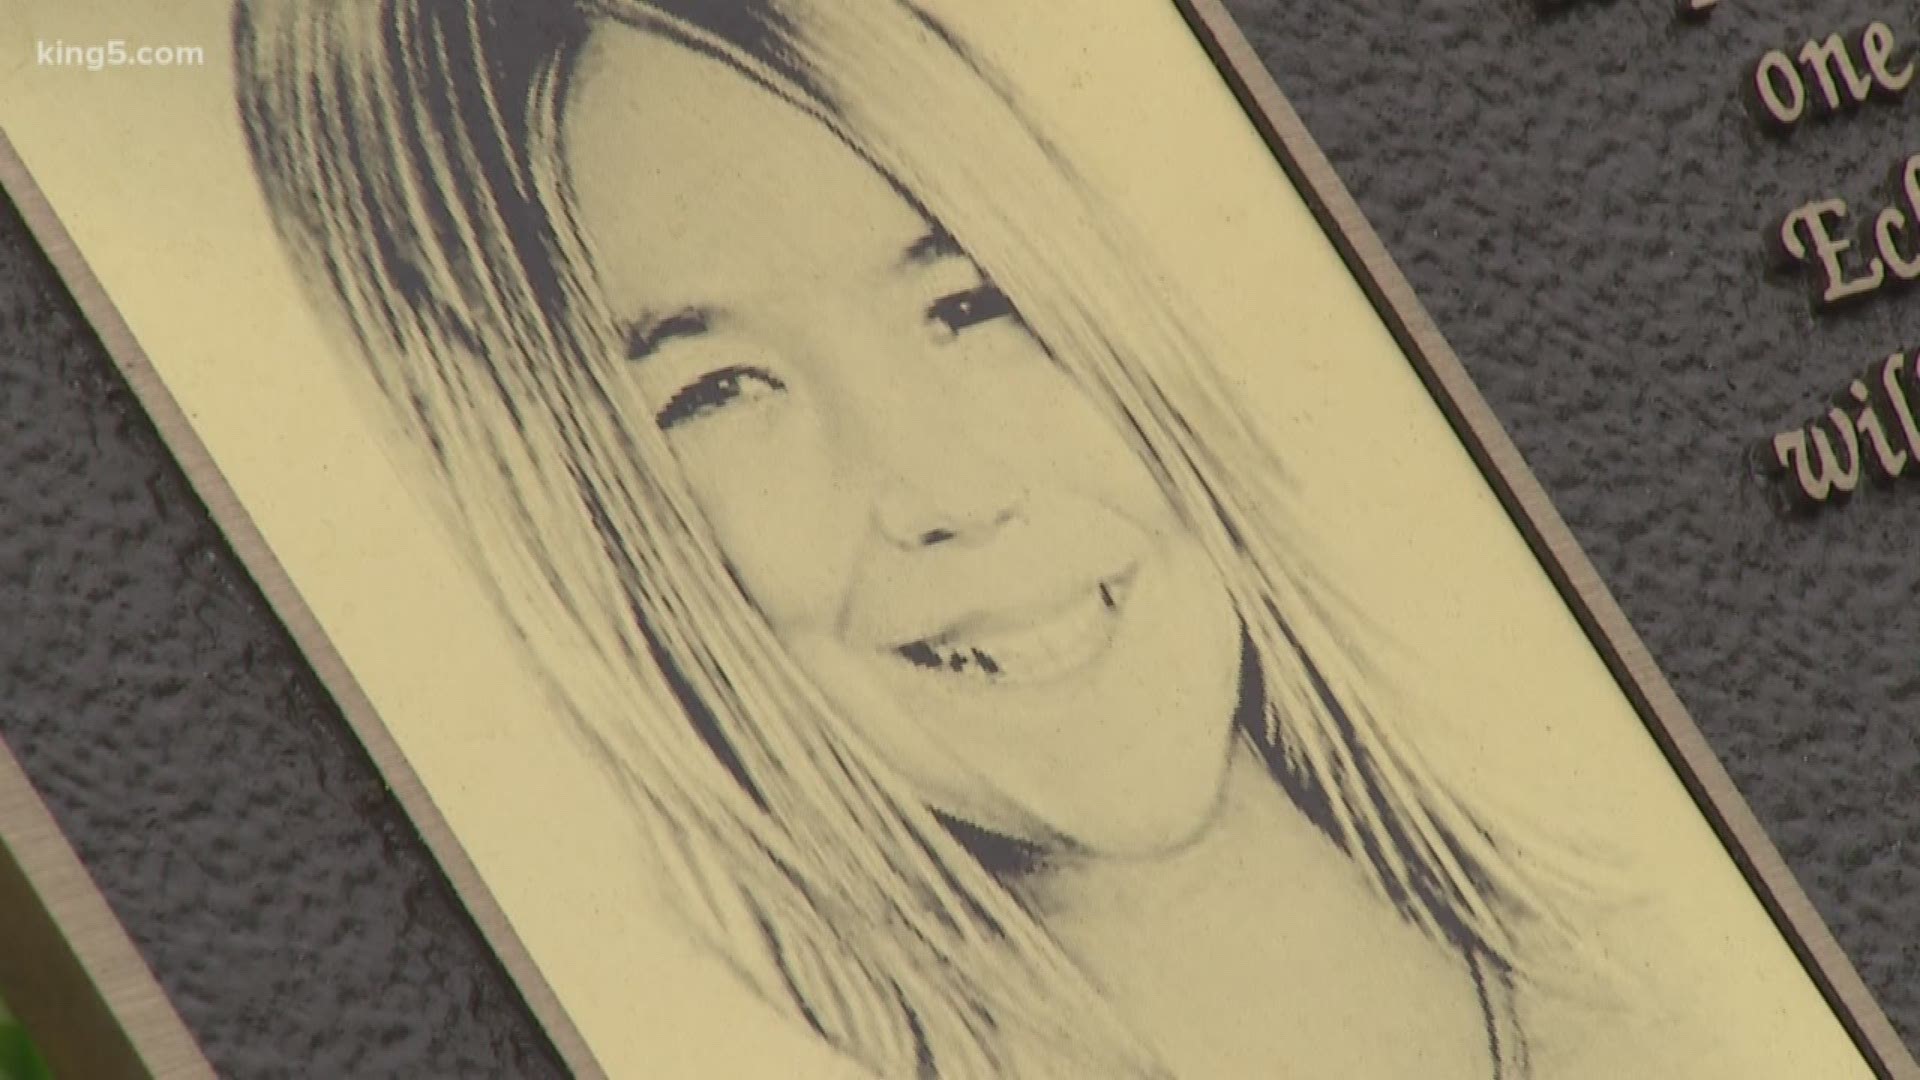 Ten years later, a community is still struggling to solve a mystery. On the tenth anniversary of the disappearance of Lindsey Baum, her mother and the county sheriff are still hoping the girl's killer will be found. KING 5 South Bureau Chief Drew Mikkelsen reports.